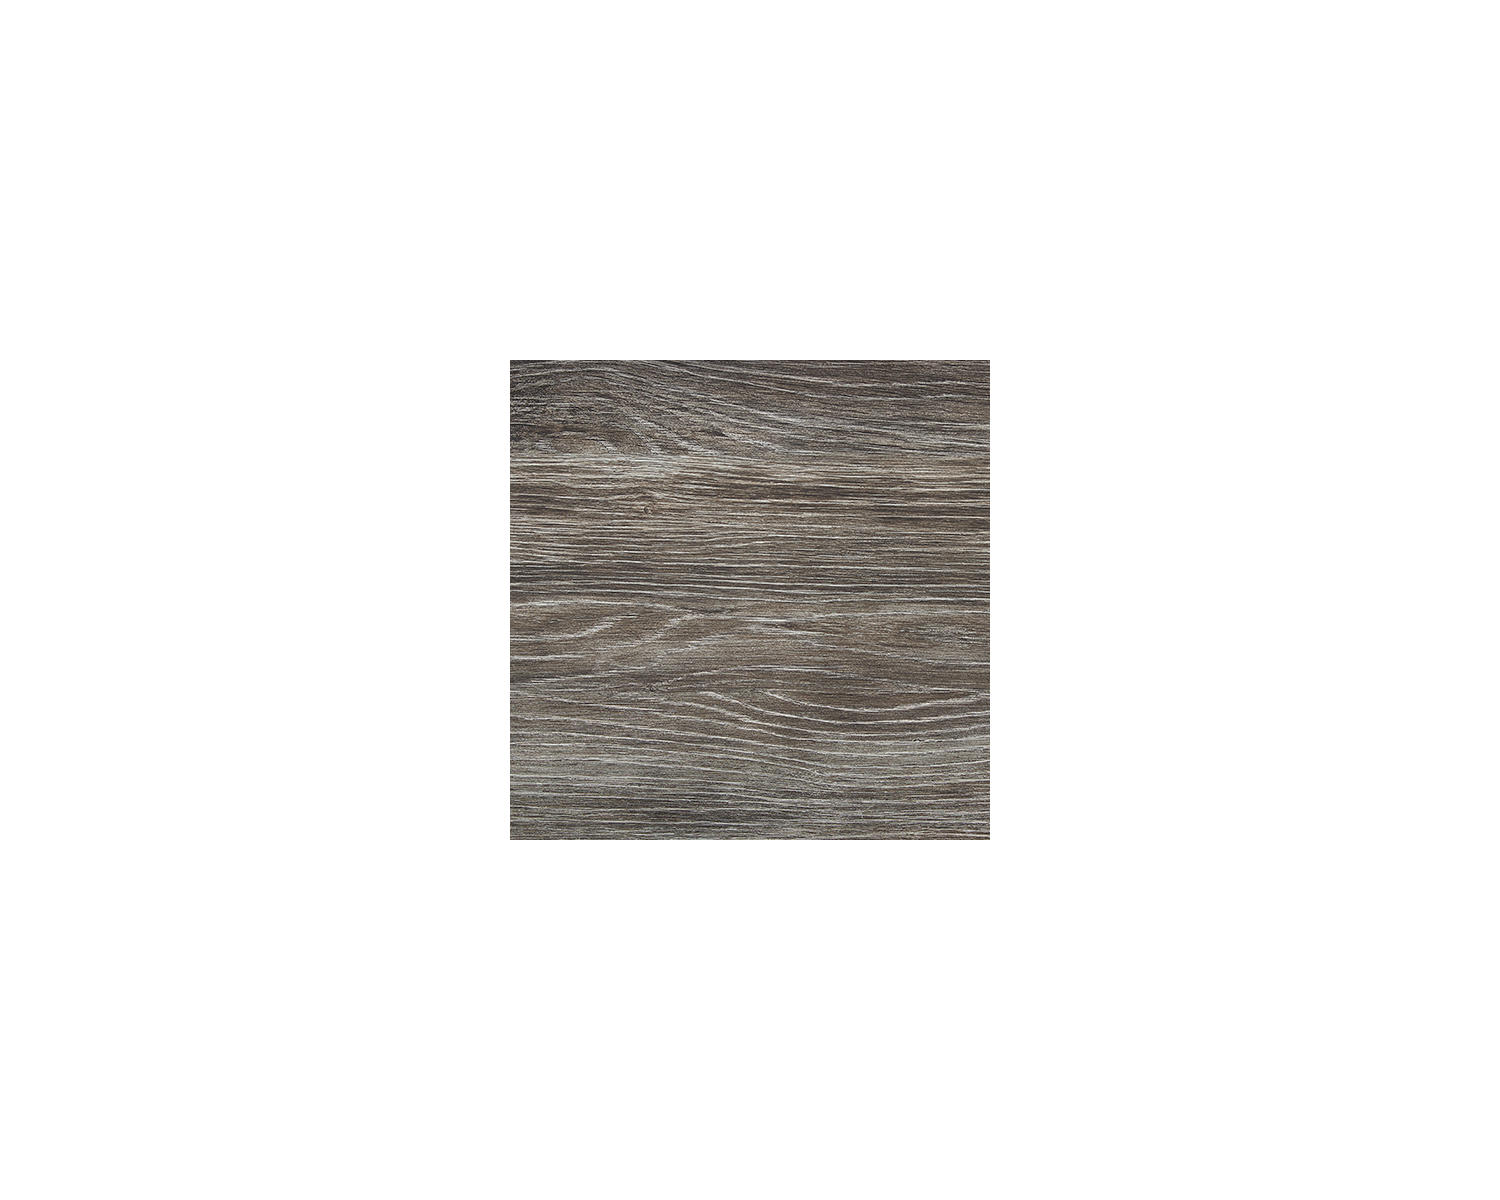 Signature Design by Ashley Cazenfeld Rustic Open Slat Panel Headboard ONLY, Queen, Weathered Gray - image 4 of 4